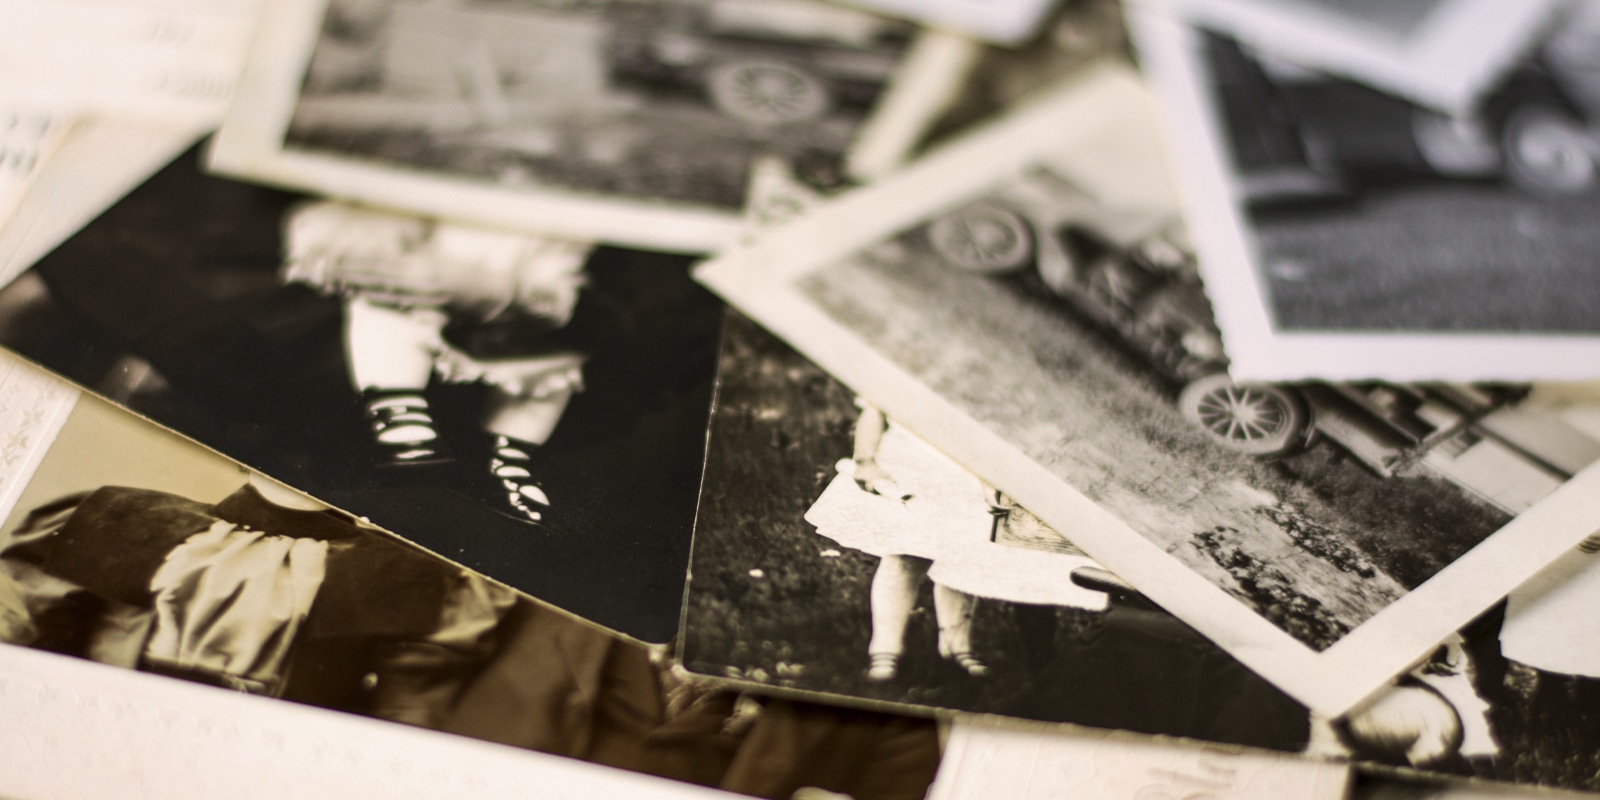 An image showing old photos on a table